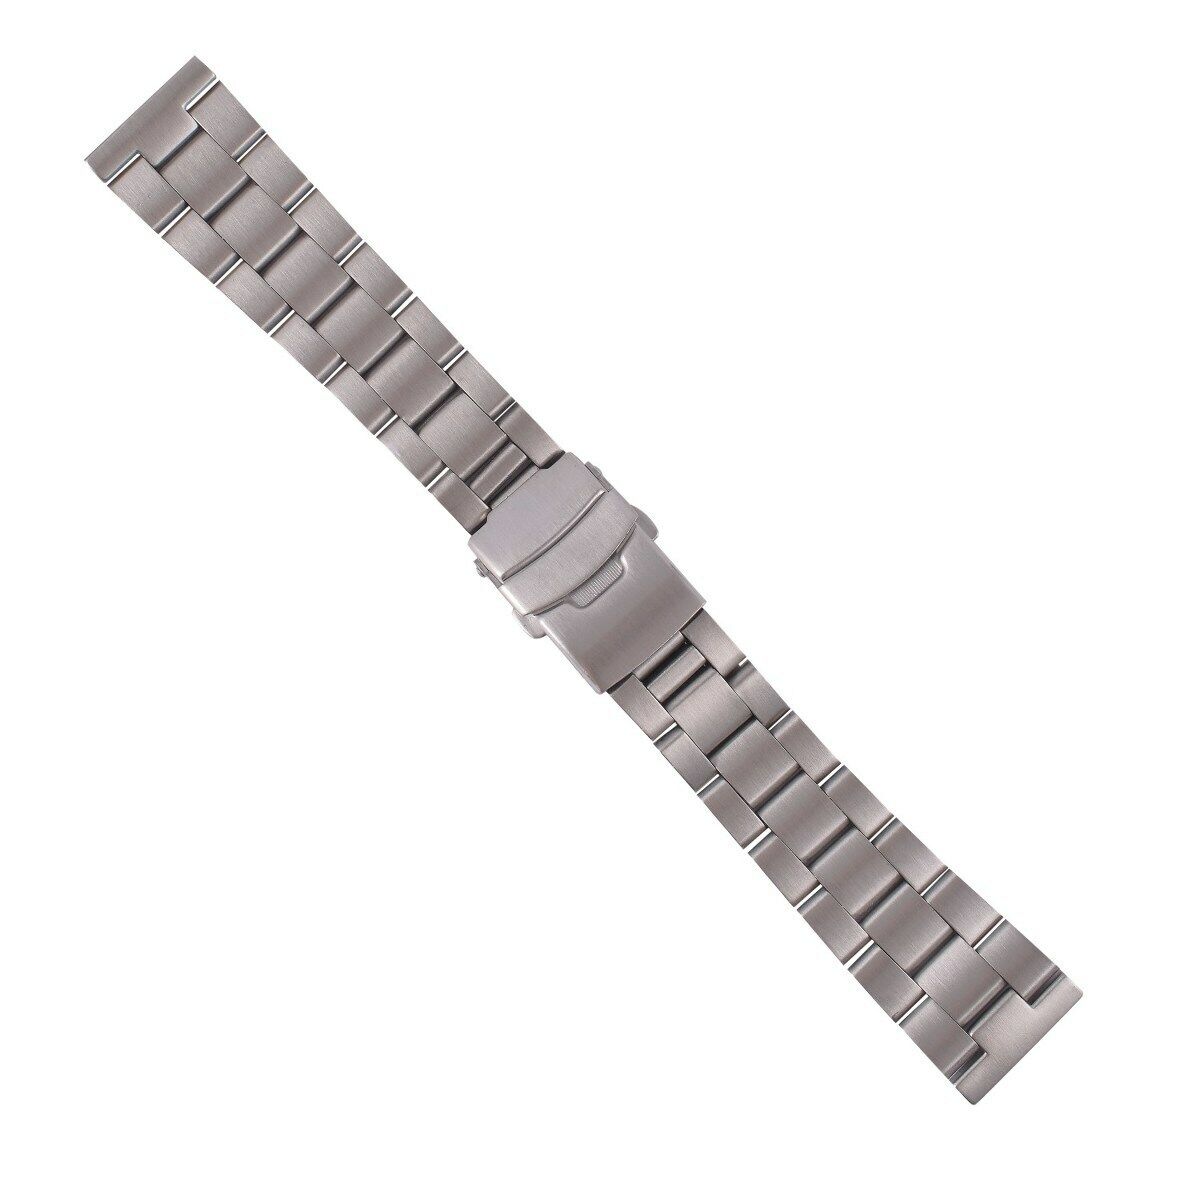 SOLID HEAVY DUTY OYSTER BAND BRACELET FOR TAG HEUER AQUARACER 22MM STRAIGHT END